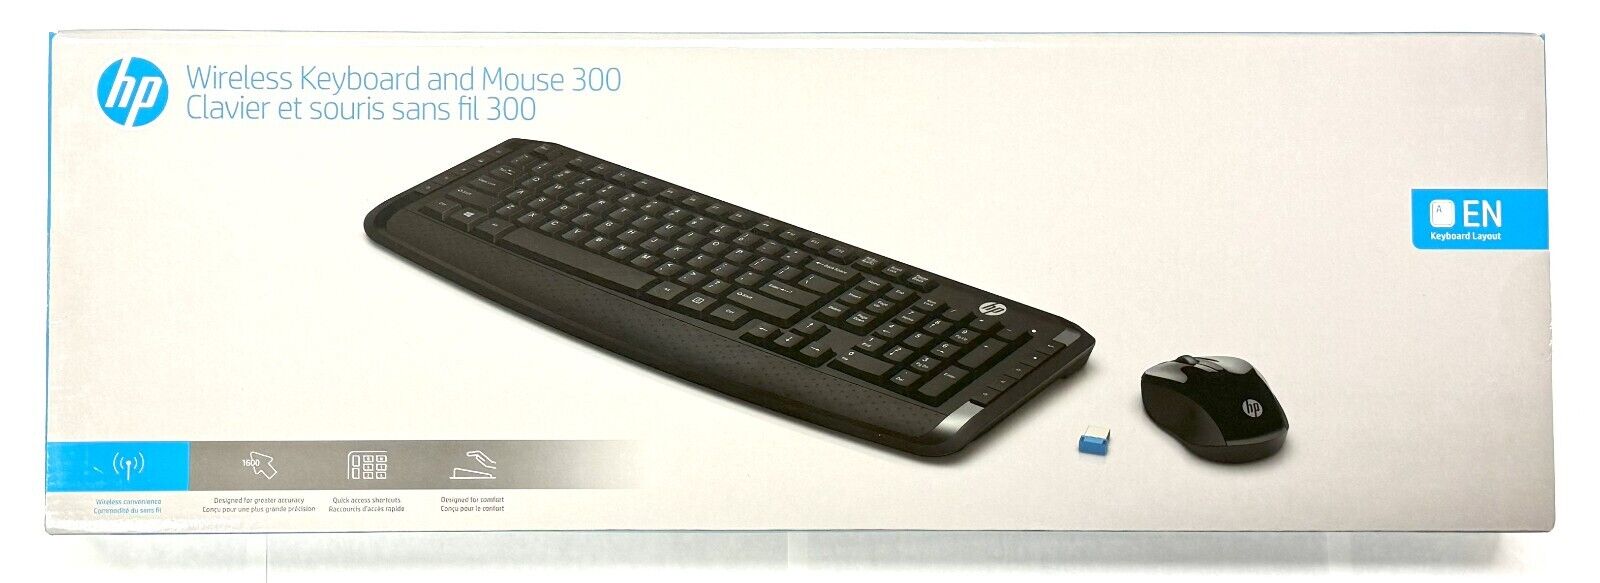 New HP Wireless Keyboard & Mouse Combo Set (USB Receiver and Batteries included)